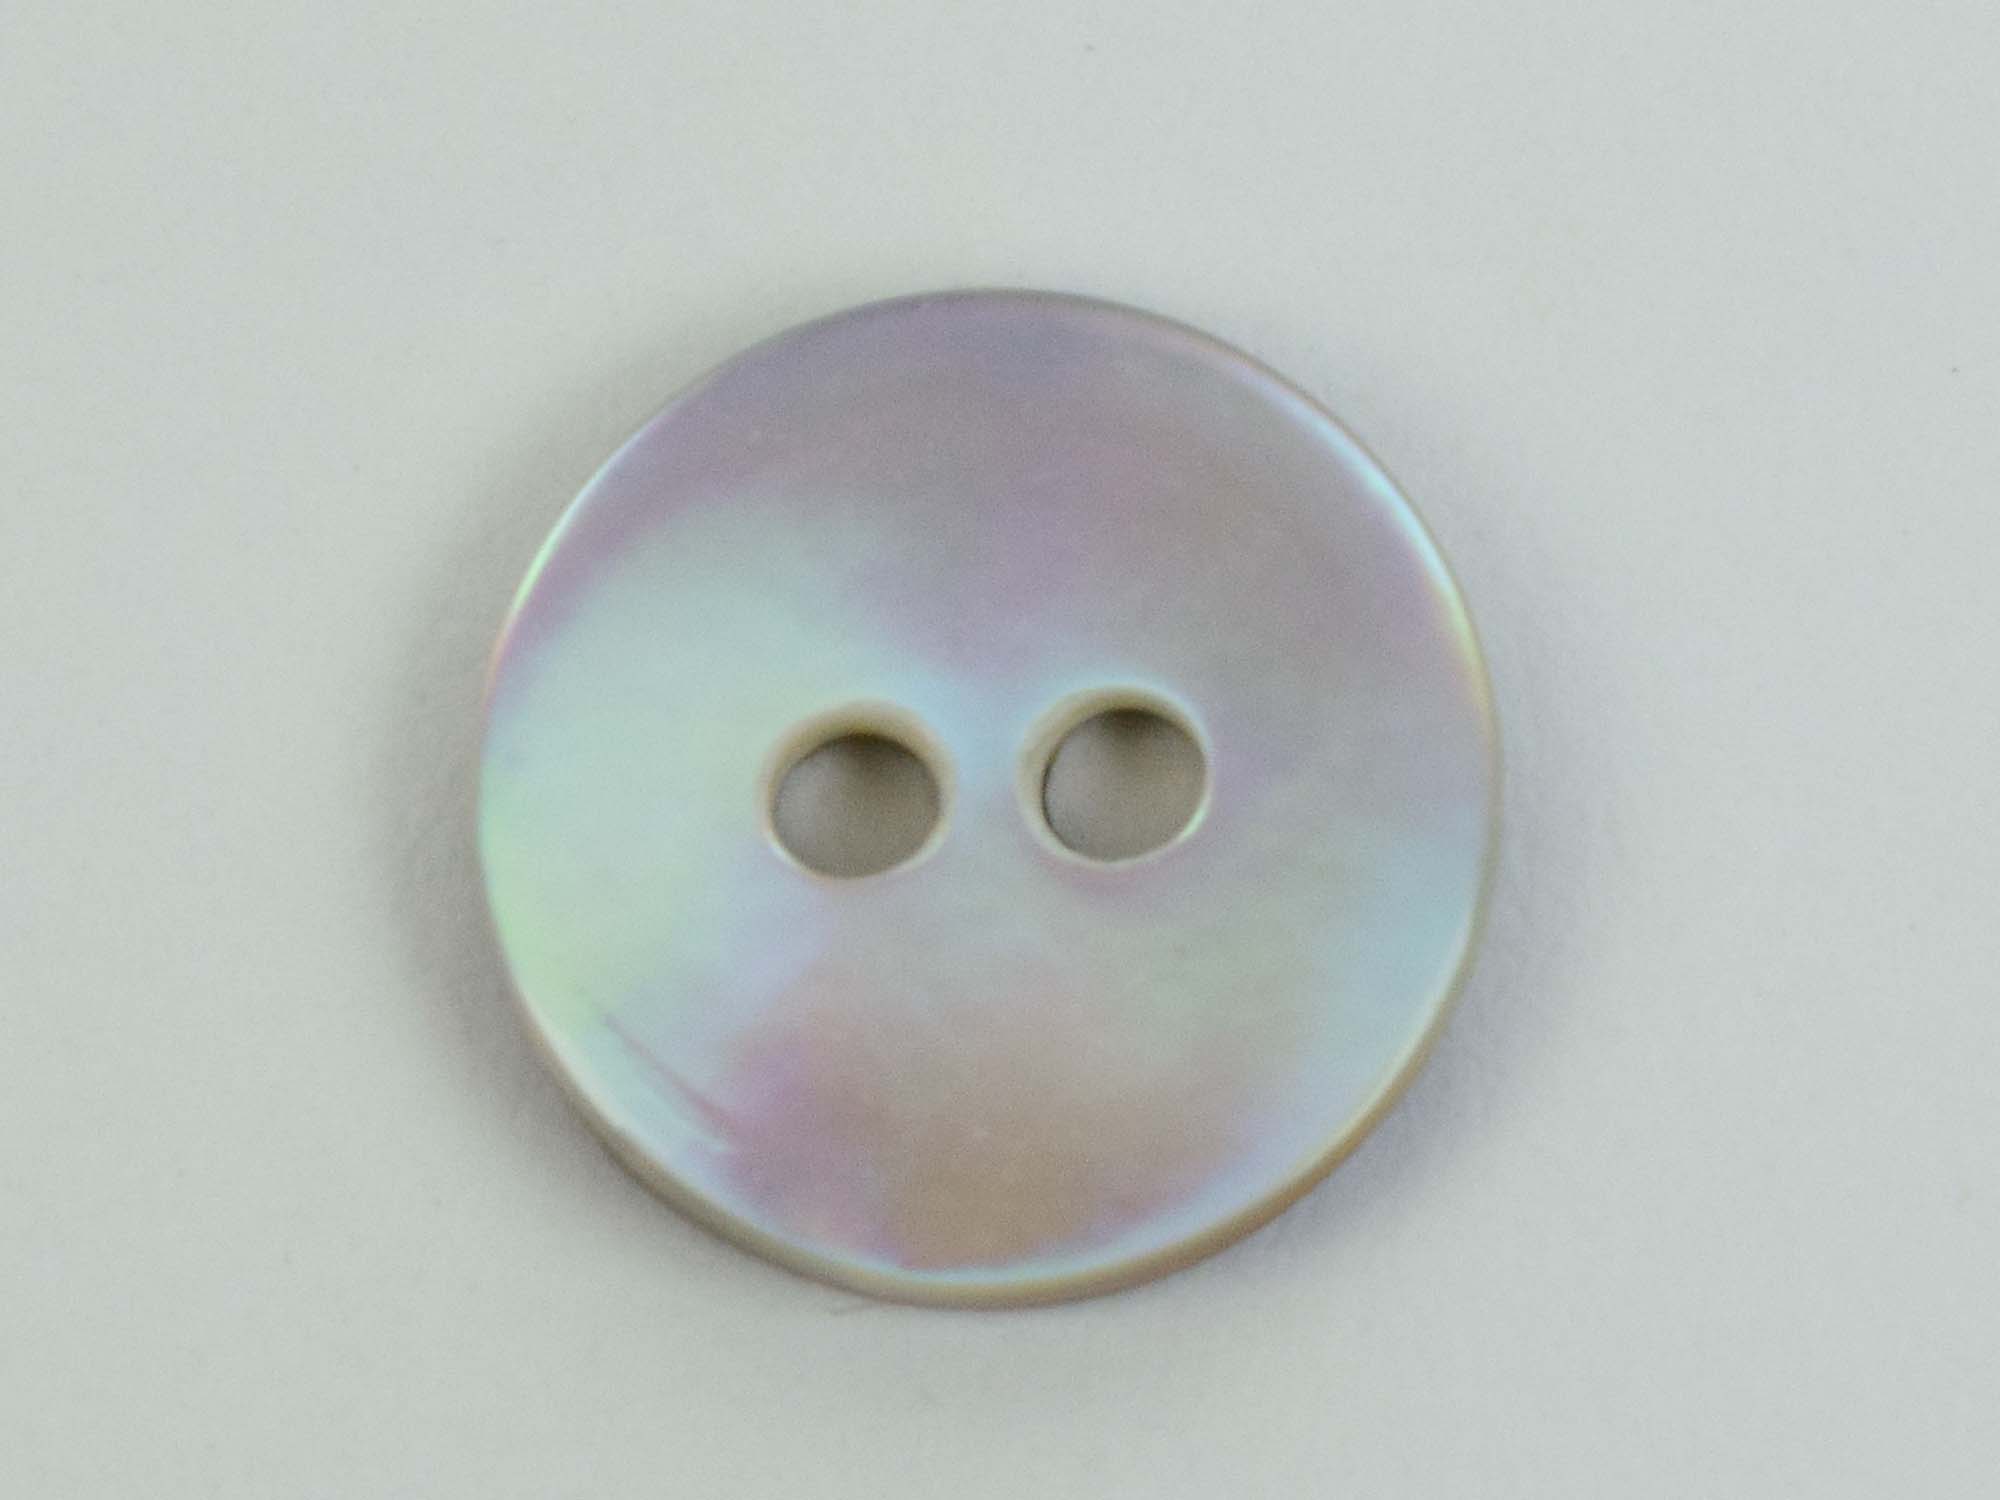 Brown Mother Of Pearl Button: 18L (11.6mm or 0.457") 